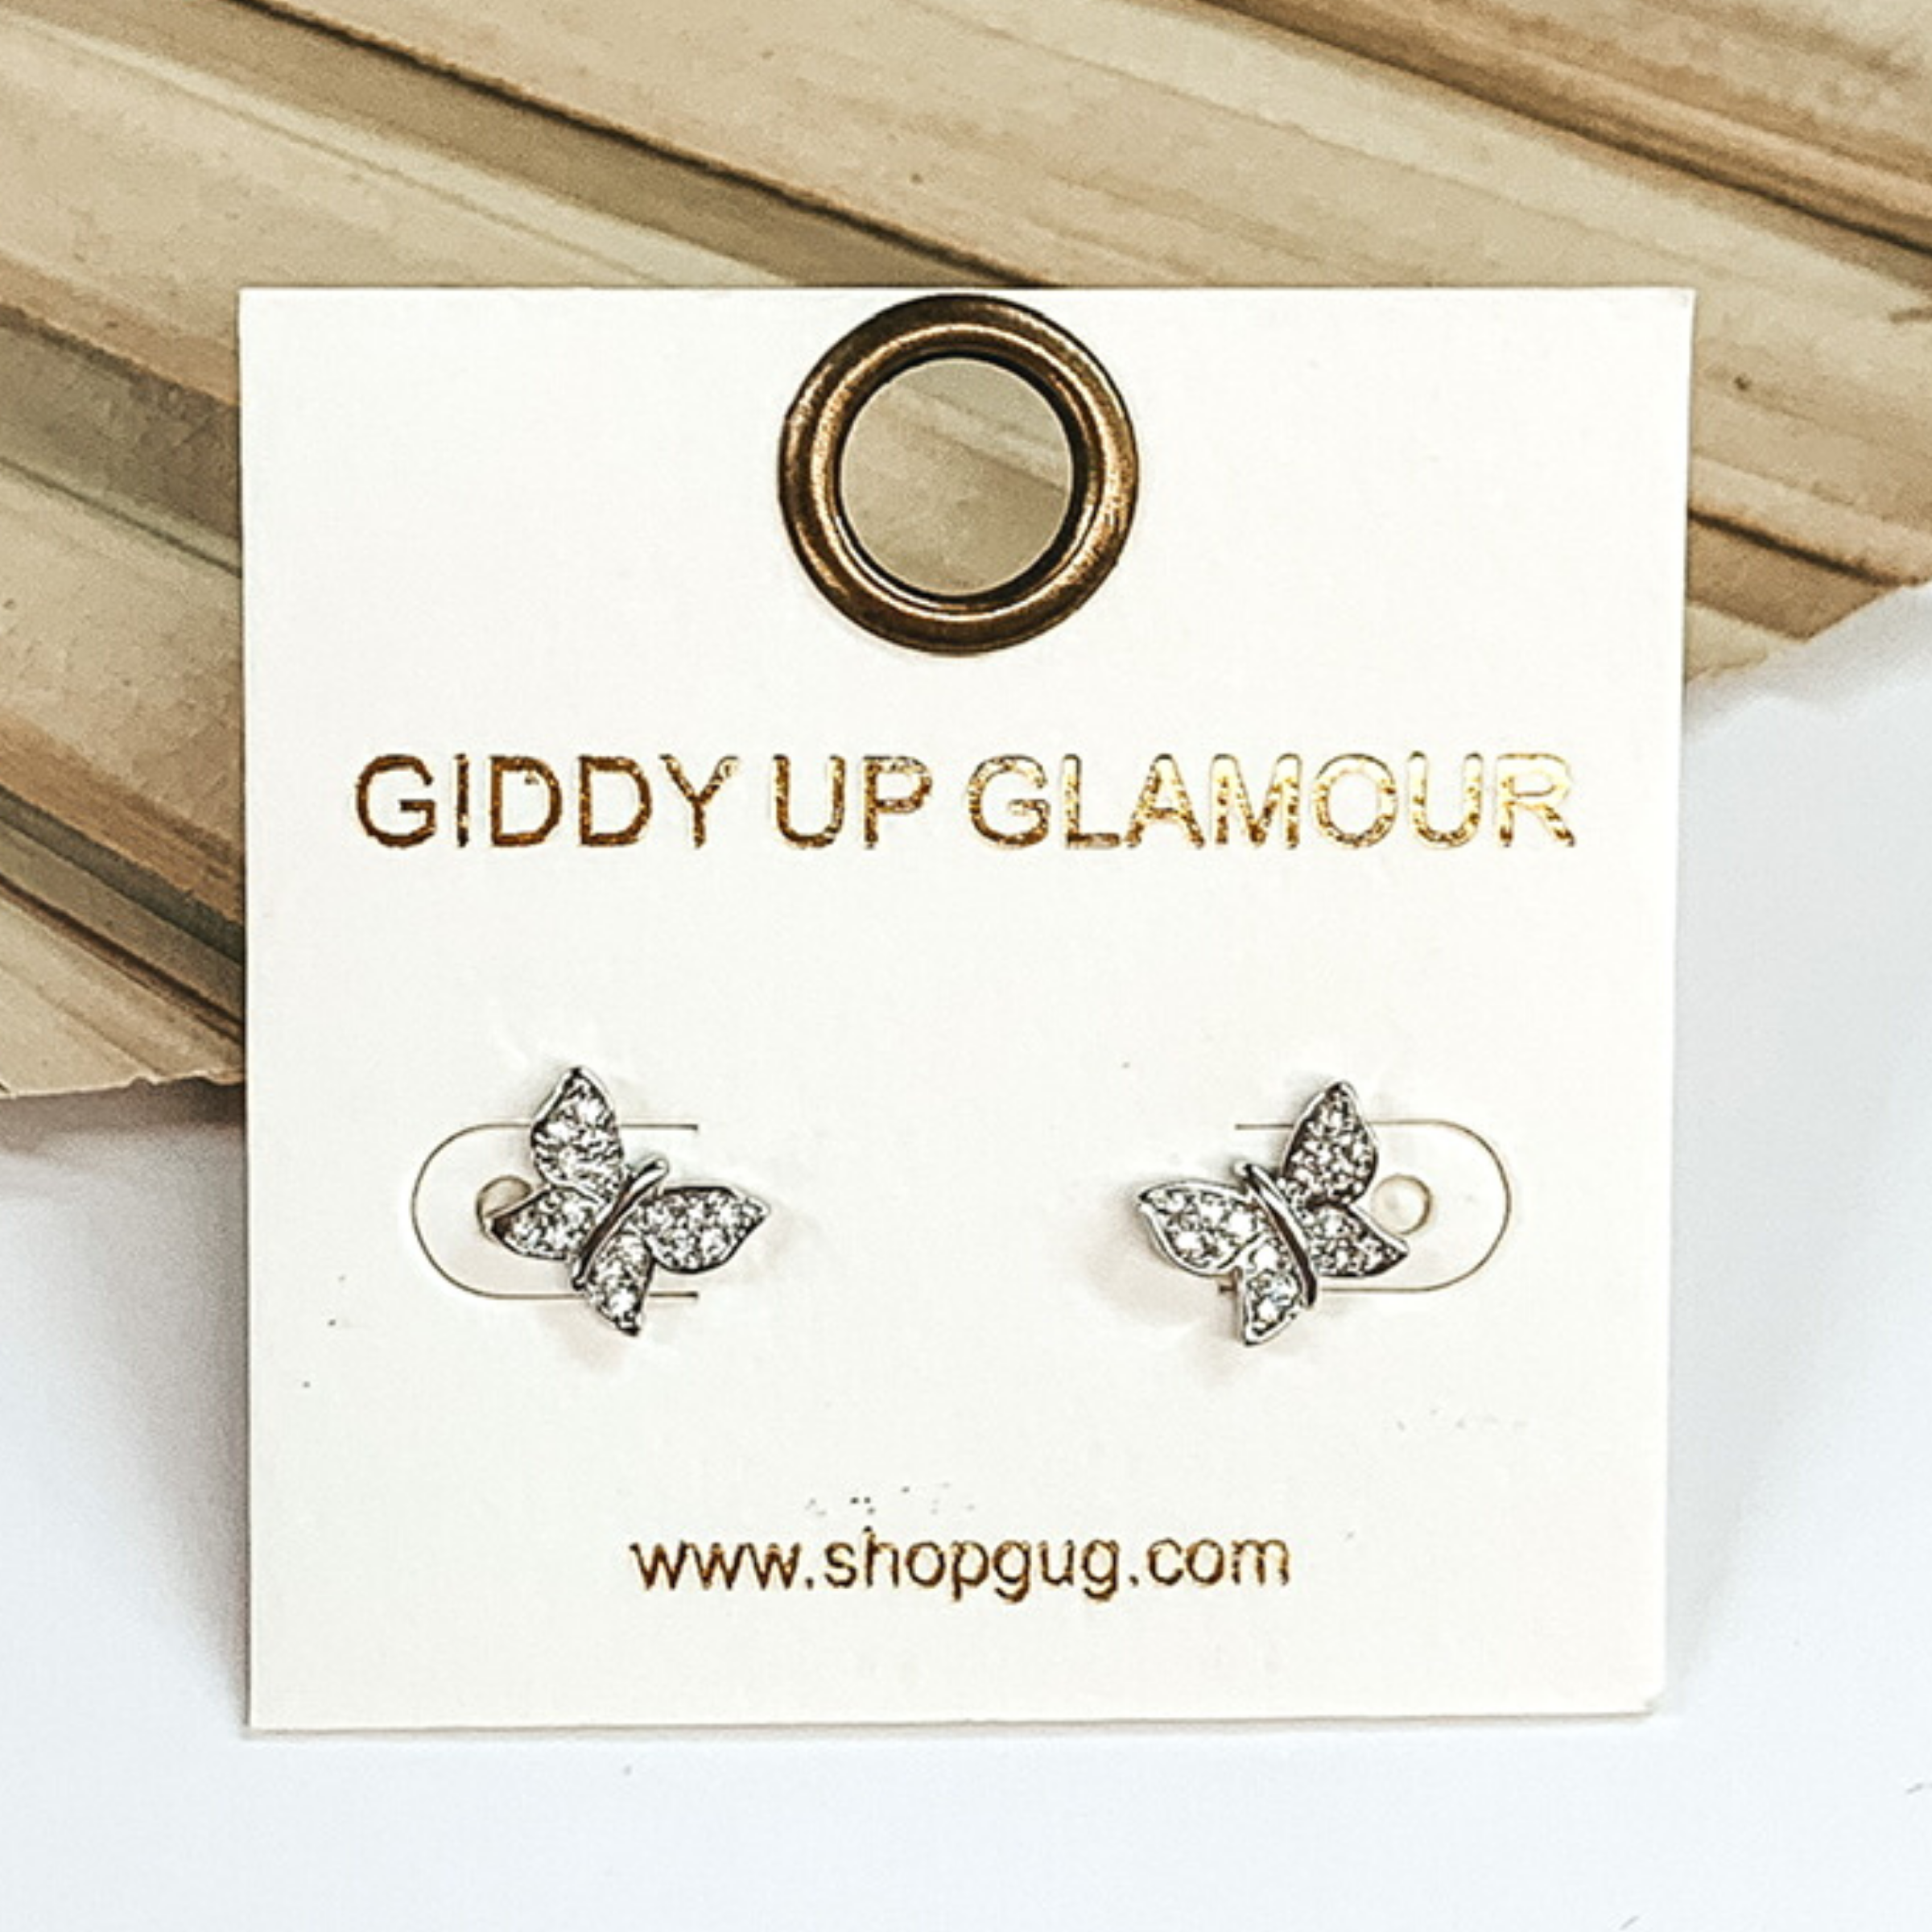 Small, silver butterfly stud earrings with clear crystals. These earrings are pictured on a white earrings card on a white and brown background.